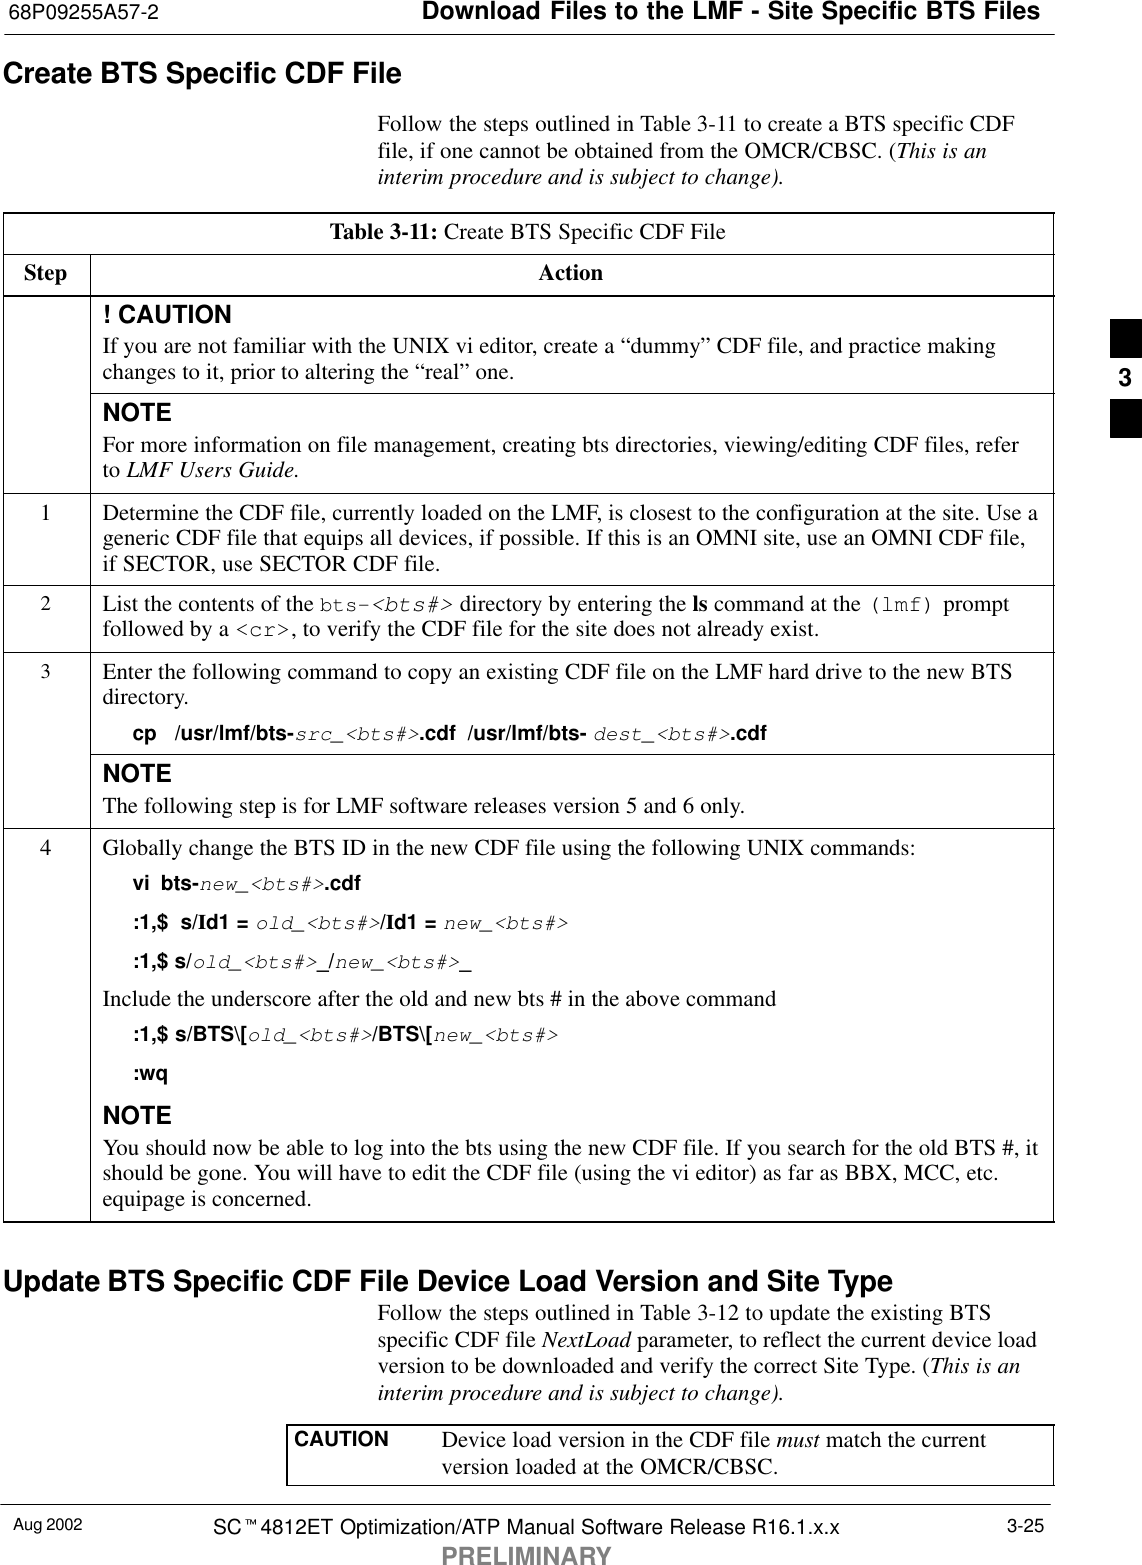 Download Files to the LMF - Site Specific BTS Files68P09255A57-2Aug 2002 SCt4812ET Optimization/ATP Manual Software Release R16.1.x.xPRELIMINARY3-25Create BTS Specific CDF FileFollow the steps outlined in Table 3-11 to create a BTS specific CDFfile, if one cannot be obtained from the OMCR/CBSC. (This is aninterim procedure and is subject to change).Table 3-11: Create BTS Specific CDF FileStep Action! CAUTIONIf you are not familiar with the UNIX vi editor, create a “dummy” CDF file, and practice makingchanges to it, prior to altering the “real” one.NOTEFor more information on file management, creating bts directories, viewing/editing CDF files, referto LMF Users Guide.1Determine the CDF file, currently loaded on the LMF, is closest to the configuration at the site. Use ageneric CDF file that equips all devices, if possible. If this is an OMNI site, use an OMNI CDF file,if SECTOR, use SECTOR CDF file.2List the contents of the bts-&lt;bts#&gt; directory by entering the ls command at the (lmf) promptfollowed by a &lt;cr&gt;, to verify the CDF file for the site does not already exist.3Enter the following command to copy an existing CDF file on the LMF hard drive to the new BTSdirectory.cp  /usr/lmf/bts-src_&lt;bts#&gt;.cdf /usr/lmf/bts- dest_&lt;bts#&gt;.cdf NOTEThe following step is for LMF software releases version 5 and 6 only.4Globally change the BTS ID in the new CDF file using the following UNIX commands:vi bts-new_&lt;bts#&gt;.cdf:1,$  s/Id1 = old_&lt;bts#&gt;/Id1 = new_&lt;bts#&gt;:1,$ s/old_&lt;bts#&gt;_/new_&lt;bts#&gt;_Include the underscore after the old and new bts # in the above command:1,$ s/BTS\[old_&lt;bts#&gt;/BTS\[new_&lt;bts#&gt;:wqNOTEYou should now be able to log into the bts using the new CDF file. If you search for the old BTS #, itshould be gone. You will have to edit the CDF file (using the vi editor) as far as BBX, MCC, etc.equipage is concerned.Update BTS Specific CDF File Device Load Version and Site TypeFollow the steps outlined in Table 3-12 to update the existing BTSspecific CDF file NextLoad parameter, to reflect the current device loadversion to be downloaded and verify the correct Site Type. (This is aninterim procedure and is subject to change).CAUTION Device load version in the CDF file must match the currentversion loaded at the OMCR/CBSC.3